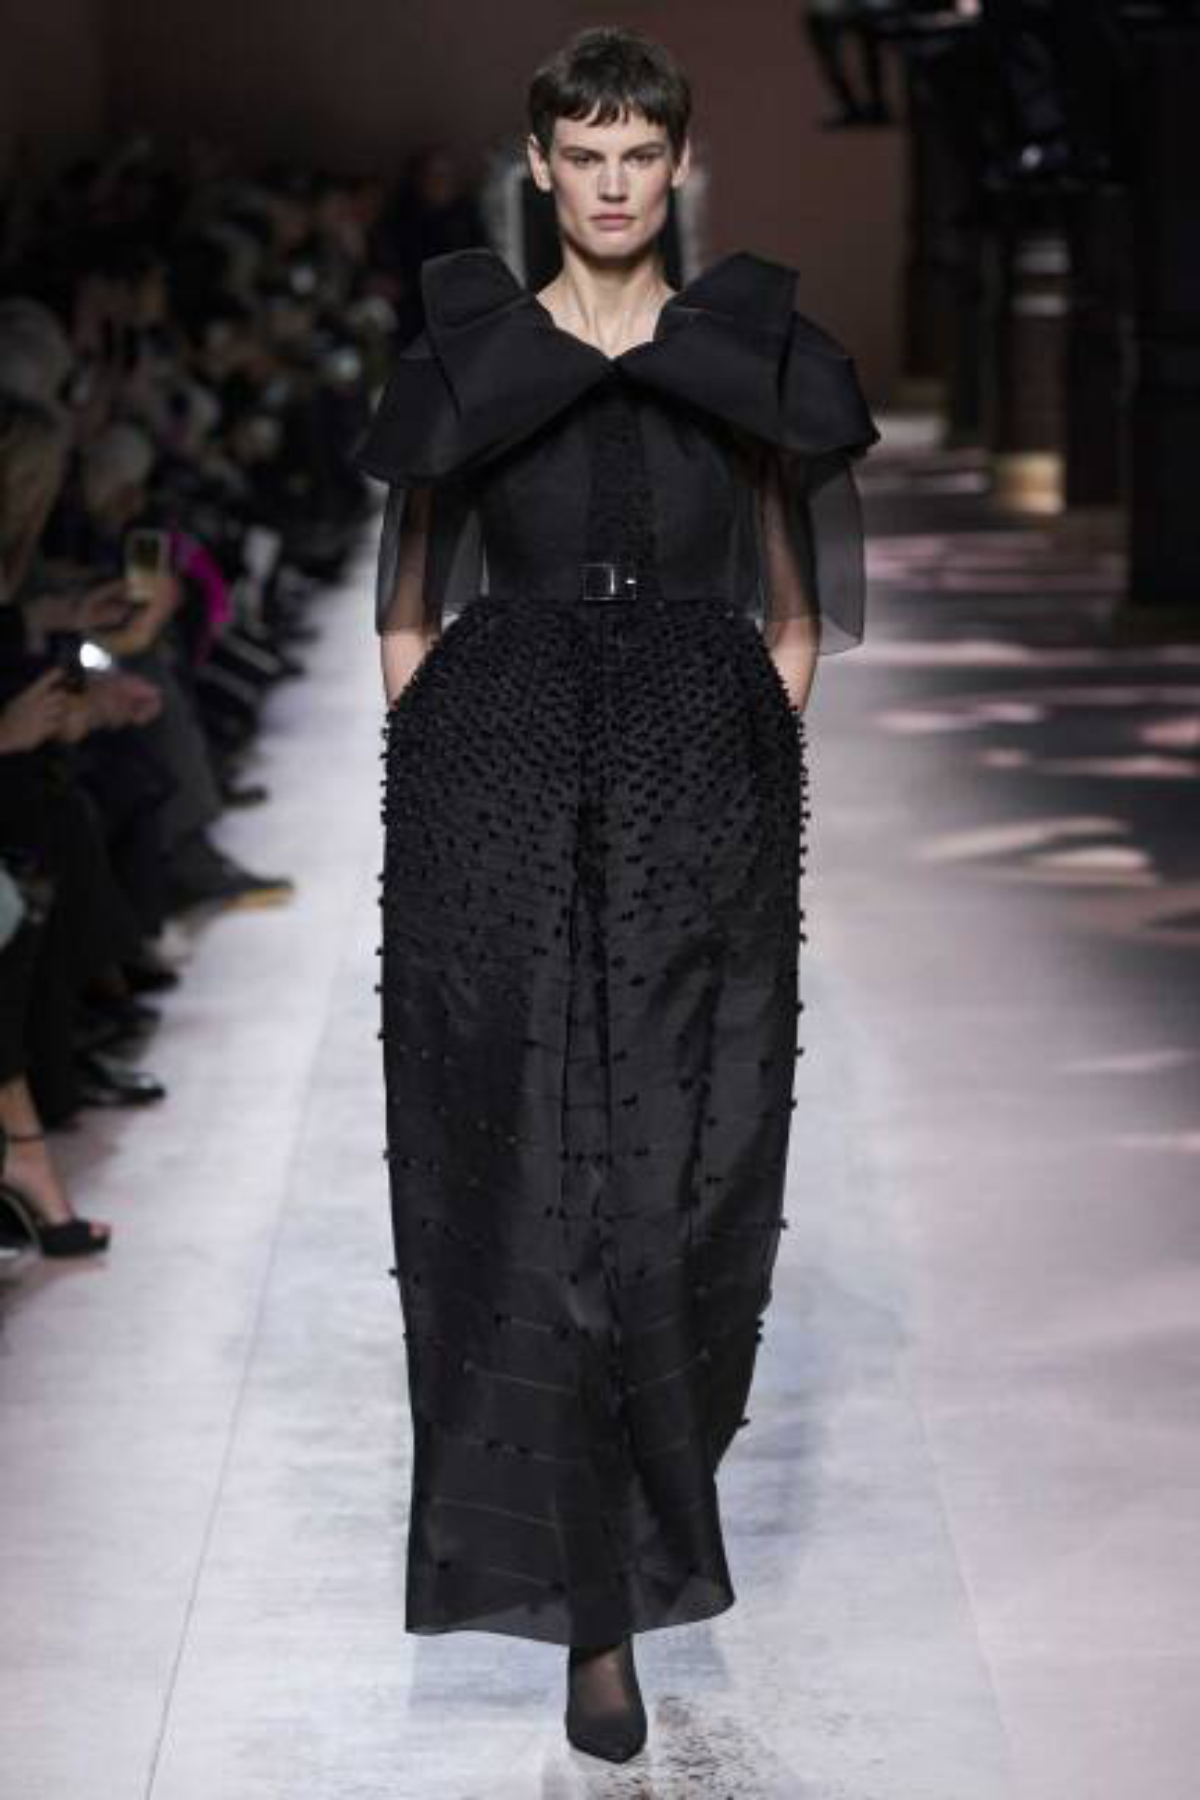 Haute couture: a “Love Letter” from Clare Waight Keller to Givenchy